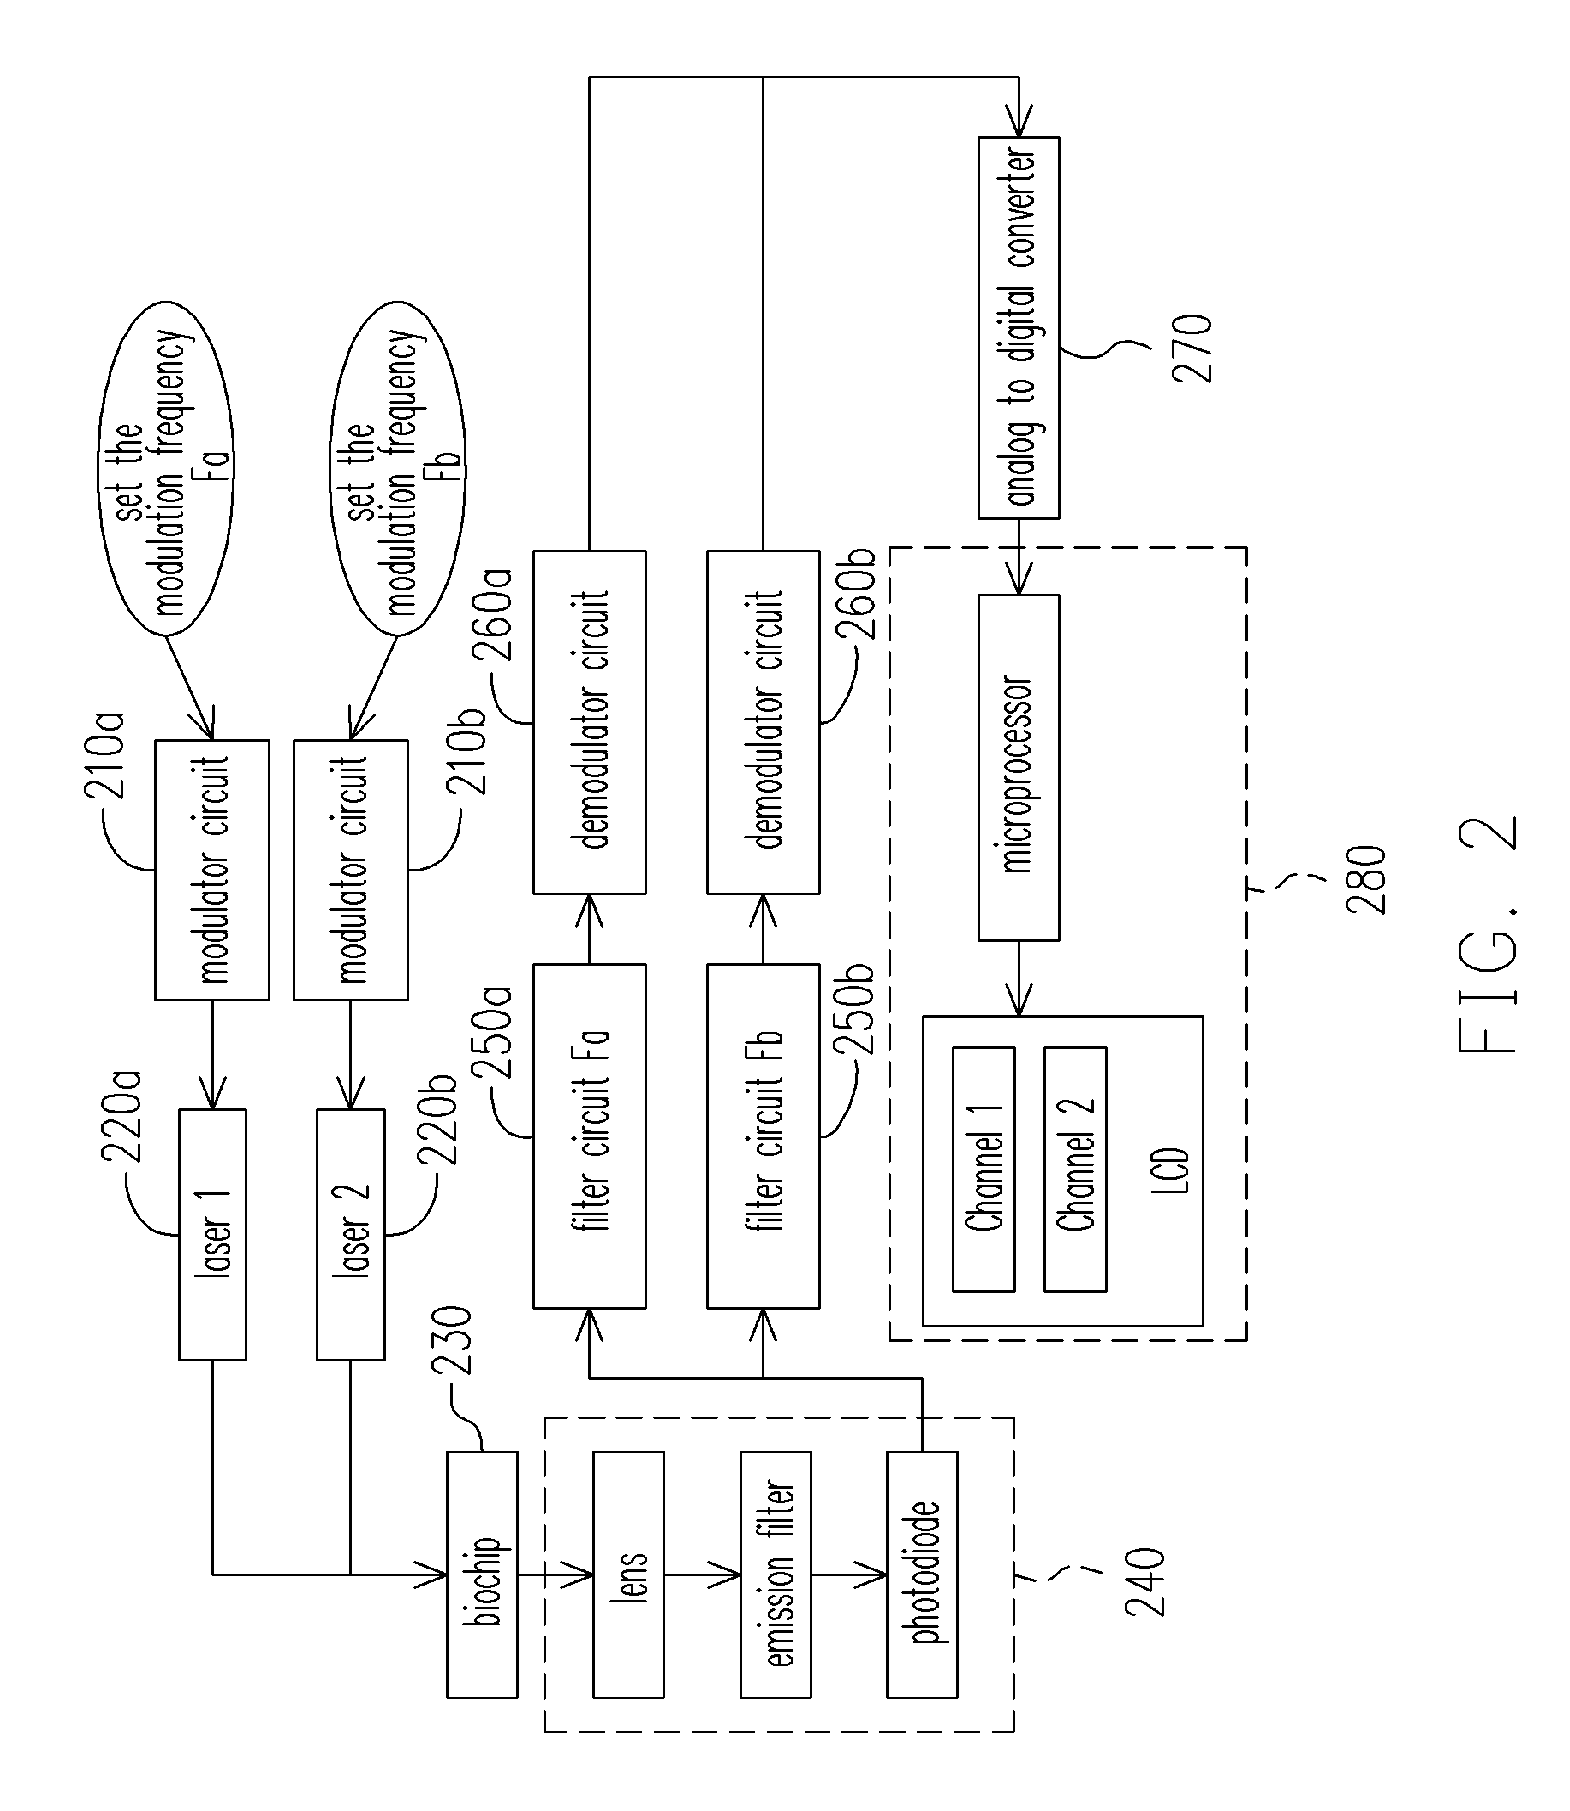 System and method for analyzing biochip